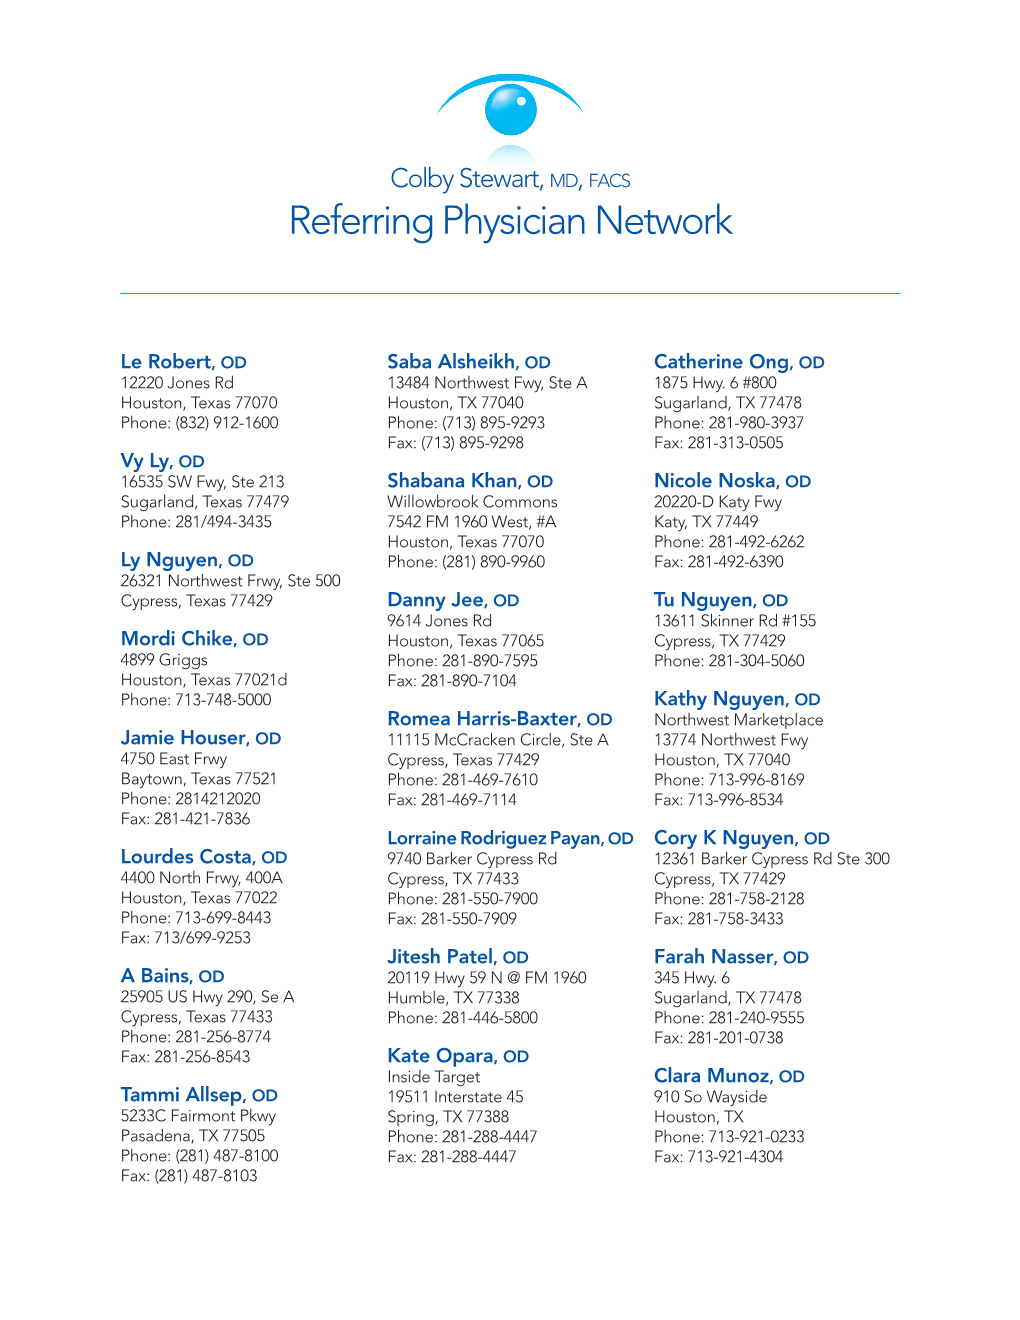 Referring Physician Network